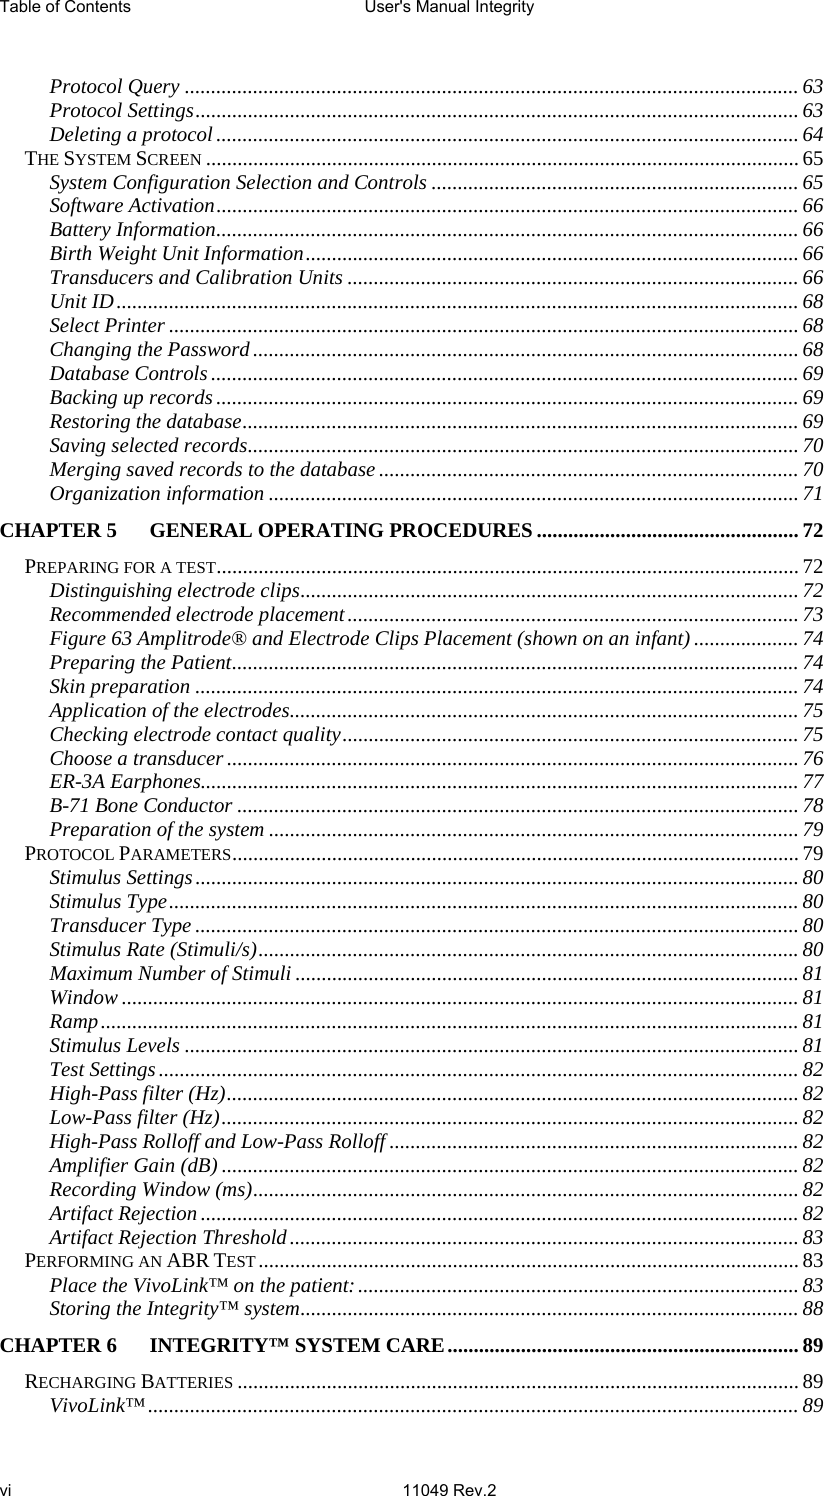 Table of Contents  User&apos;s Manual Integrity     vi 11049 Rev.2   Protocol Query ..................................................................................................................... 63 Protocol Settings................................................................................................................... 63 Deleting a protocol............................................................................................................... 64 THE SYSTEM SCREEN ................................................................................................................. 65 System Configuration Selection and Controls ...................................................................... 65 Software Activation............................................................................................................... 66 Battery Information............................................................................................................... 66 Birth Weight Unit Information.............................................................................................. 66 Transducers and Calibration Units ...................................................................................... 66 Unit ID.................................................................................................................................. 68 Select Printer ........................................................................................................................ 68 Changing the Password ........................................................................................................ 68 Database Controls ................................................................................................................ 69 Backing up records ............................................................................................................... 69 Restoring the database..........................................................................................................69 Saving selected records.........................................................................................................70 Merging saved records to the database ................................................................................ 70 Organization information ..................................................................................................... 71 CHAPTER 5 GENERAL OPERATING PROCEDURES .................................................. 72 PREPARING FOR A TEST............................................................................................................... 72 Distinguishing electrode clips............................................................................................... 72 Recommended electrode placement...................................................................................... 73 Figure 63 Amplitrode® and Electrode Clips Placement (shown on an infant) .................... 74 Preparing the Patient............................................................................................................ 74 Skin preparation ................................................................................................................... 74 Application of the electrodes................................................................................................. 75 Checking electrode contact quality....................................................................................... 75 Choose a transducer .............................................................................................................76 ER-3A Earphones.................................................................................................................. 77 B-71 Bone Conductor ........................................................................................................... 78 Preparation of the system ..................................................................................................... 79 PROTOCOL PARAMETERS............................................................................................................ 79 Stimulus Settings................................................................................................................... 80 Stimulus Type........................................................................................................................ 80 Transducer Type ................................................................................................................... 80 Stimulus Rate (Stimuli/s).......................................................................................................80 Maximum Number of Stimuli ................................................................................................ 81 Window ................................................................................................................................. 81 Ramp..................................................................................................................................... 81 Stimulus Levels ..................................................................................................................... 81 Test Settings.......................................................................................................................... 82 High-Pass filter (Hz)............................................................................................................. 82 Low-Pass filter (Hz).............................................................................................................. 82 High-Pass Rolloff and Low-Pass Rolloff .............................................................................. 82 Amplifier Gain (dB) .............................................................................................................. 82 Recording Window (ms)........................................................................................................ 82 Artifact Rejection .................................................................................................................. 82 Artifact Rejection Threshold................................................................................................. 83 PERFORMING AN ABR TEST....................................................................................................... 83 Place the VivoLink™ on the patient:.................................................................................... 83 Storing the Integrity™ system............................................................................................... 88 CHAPTER 6 INTEGRITY™ SYSTEM CARE................................................................... 89 RECHARGING BATTERIES ........................................................................................................... 89 VivoLink™............................................................................................................................ 89 